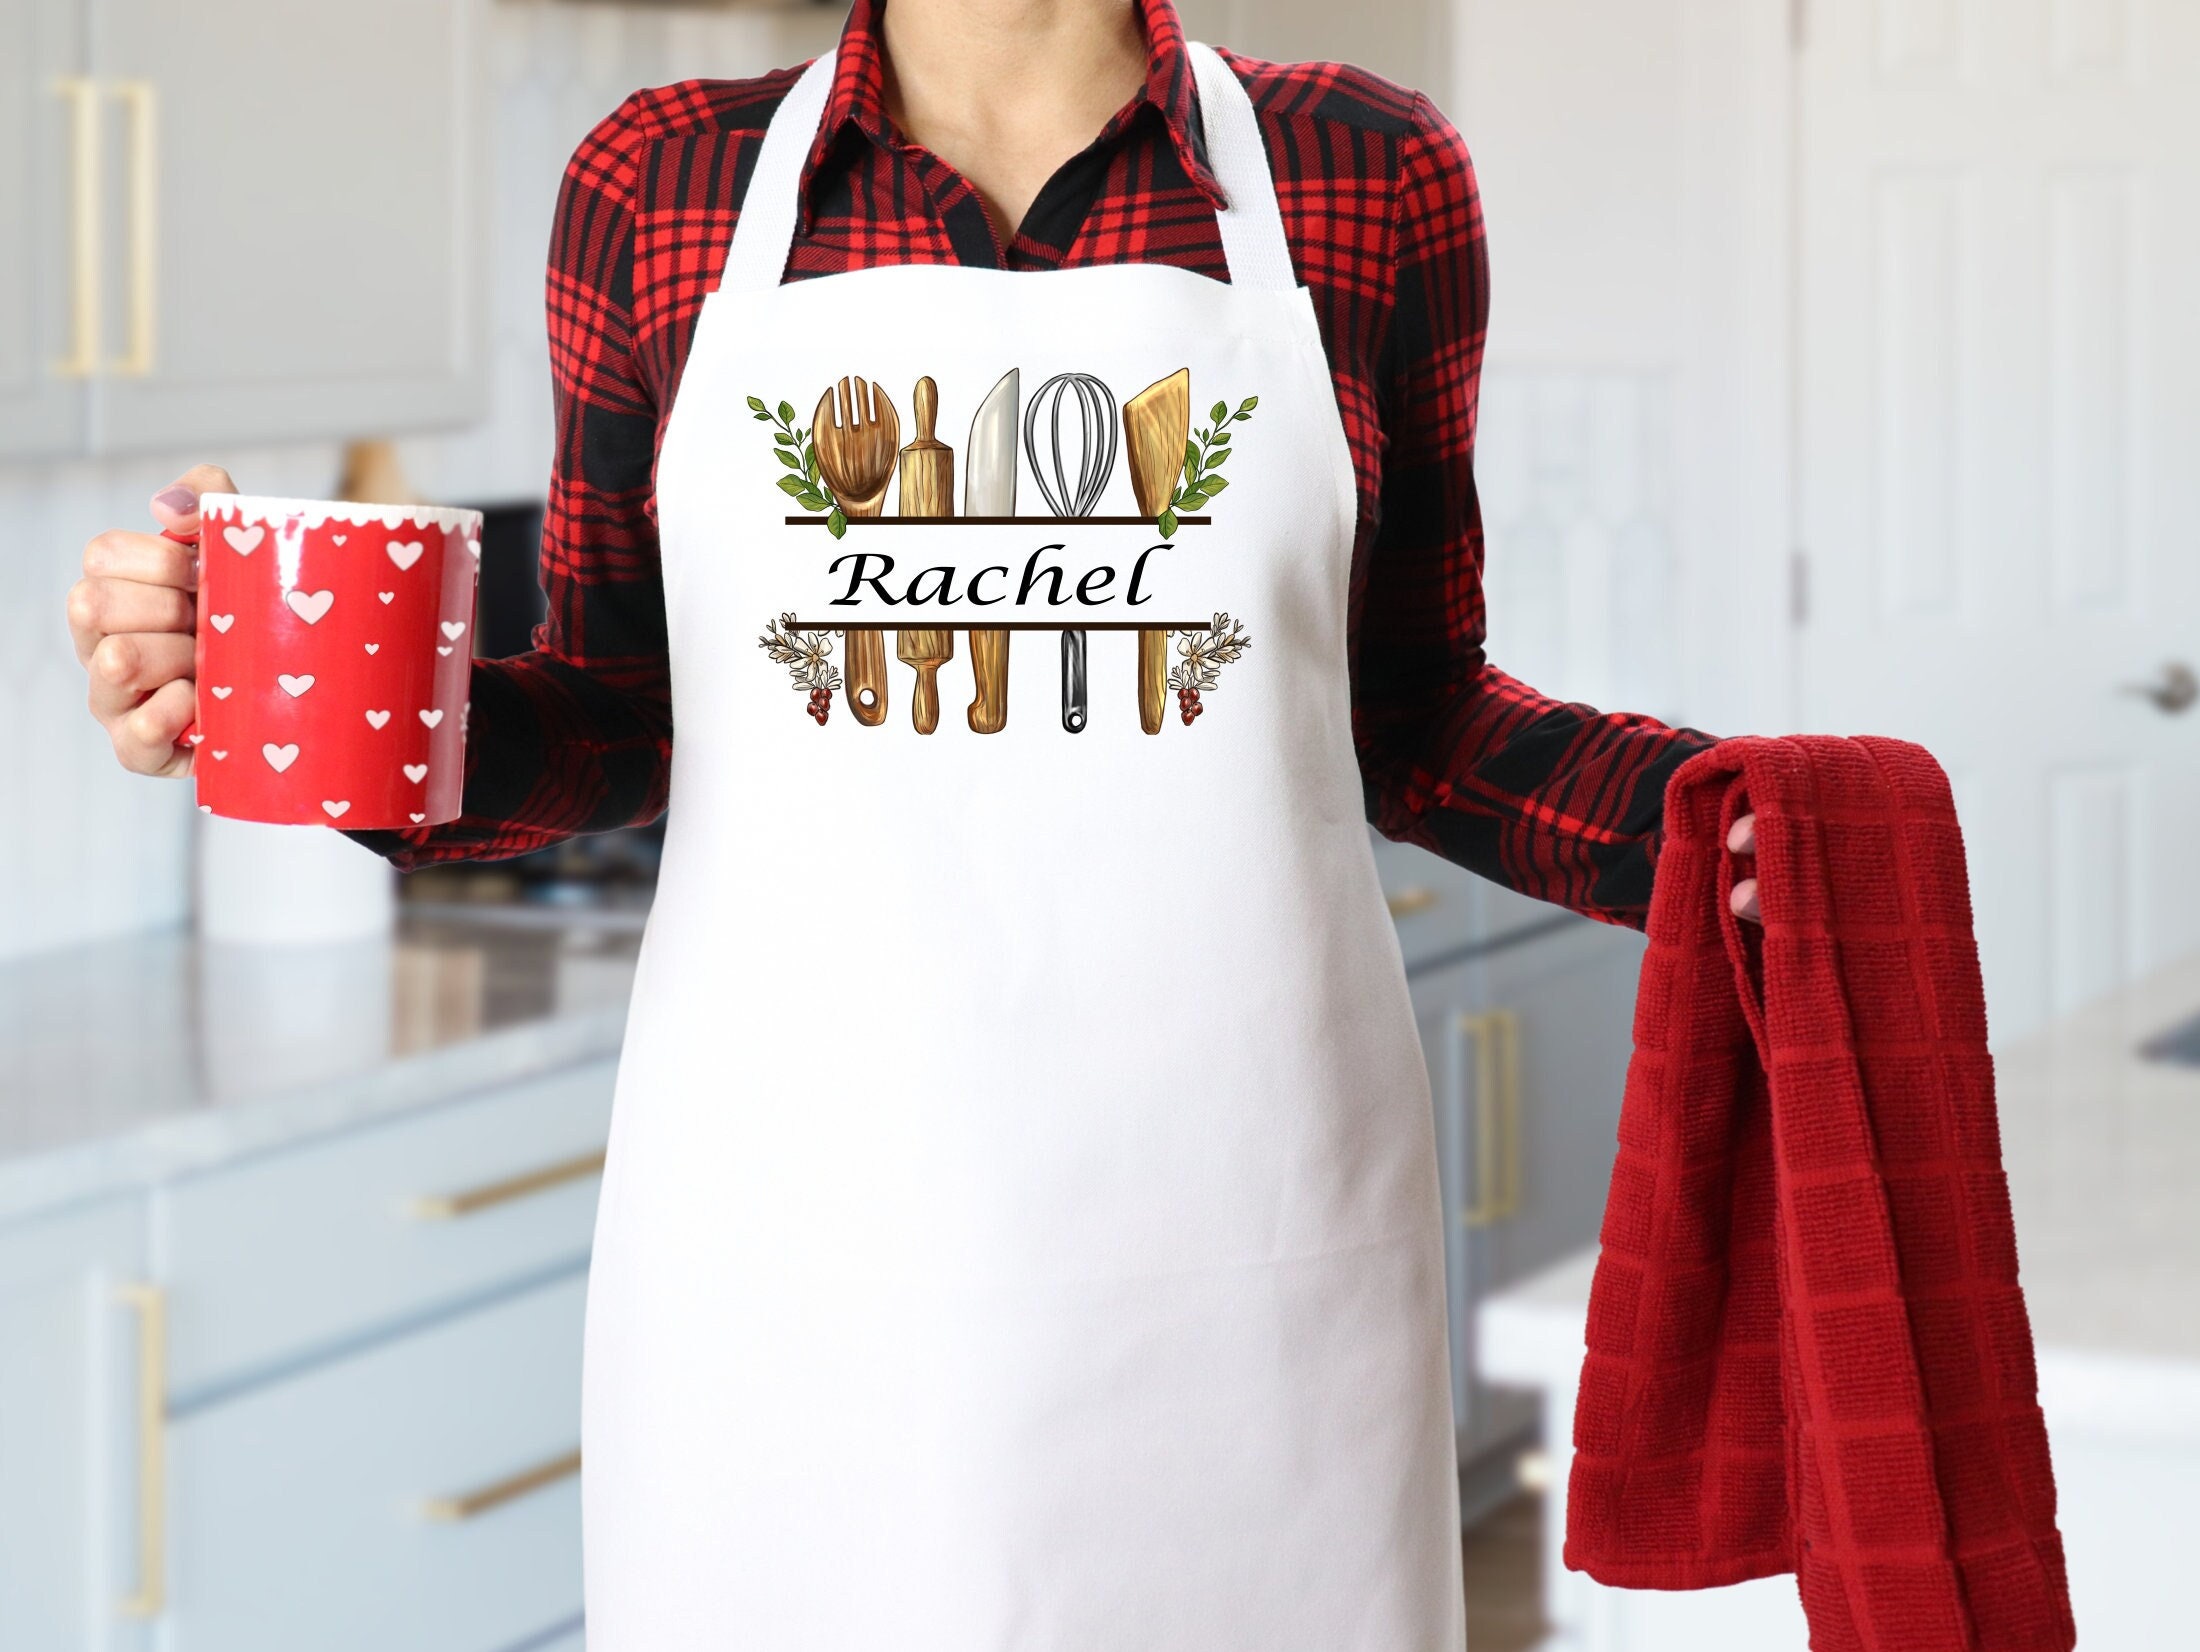 Kiss The Chef Apron - Kitchen Wear Cupcake Food Bake Cooking Funny Banter